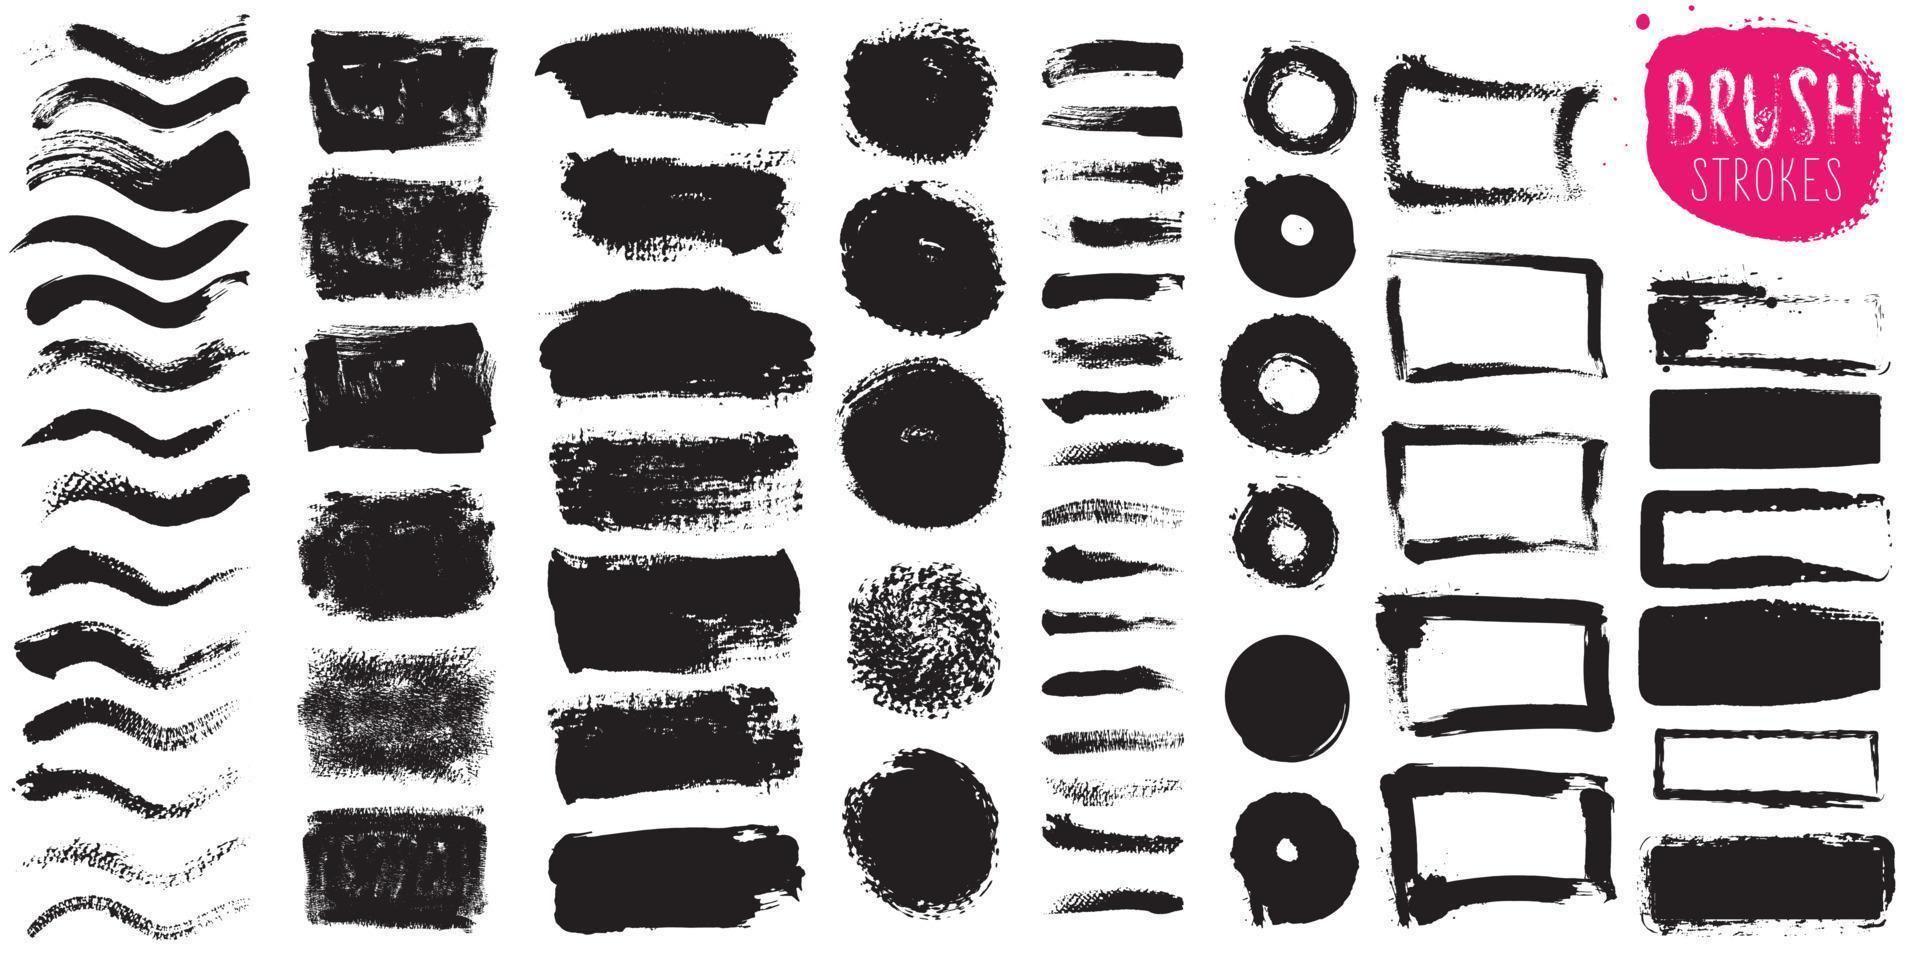 Set of vector paintbrush. Brush strokes text boxes. Grunge design elements. Dirty texture banners. Ink splatters